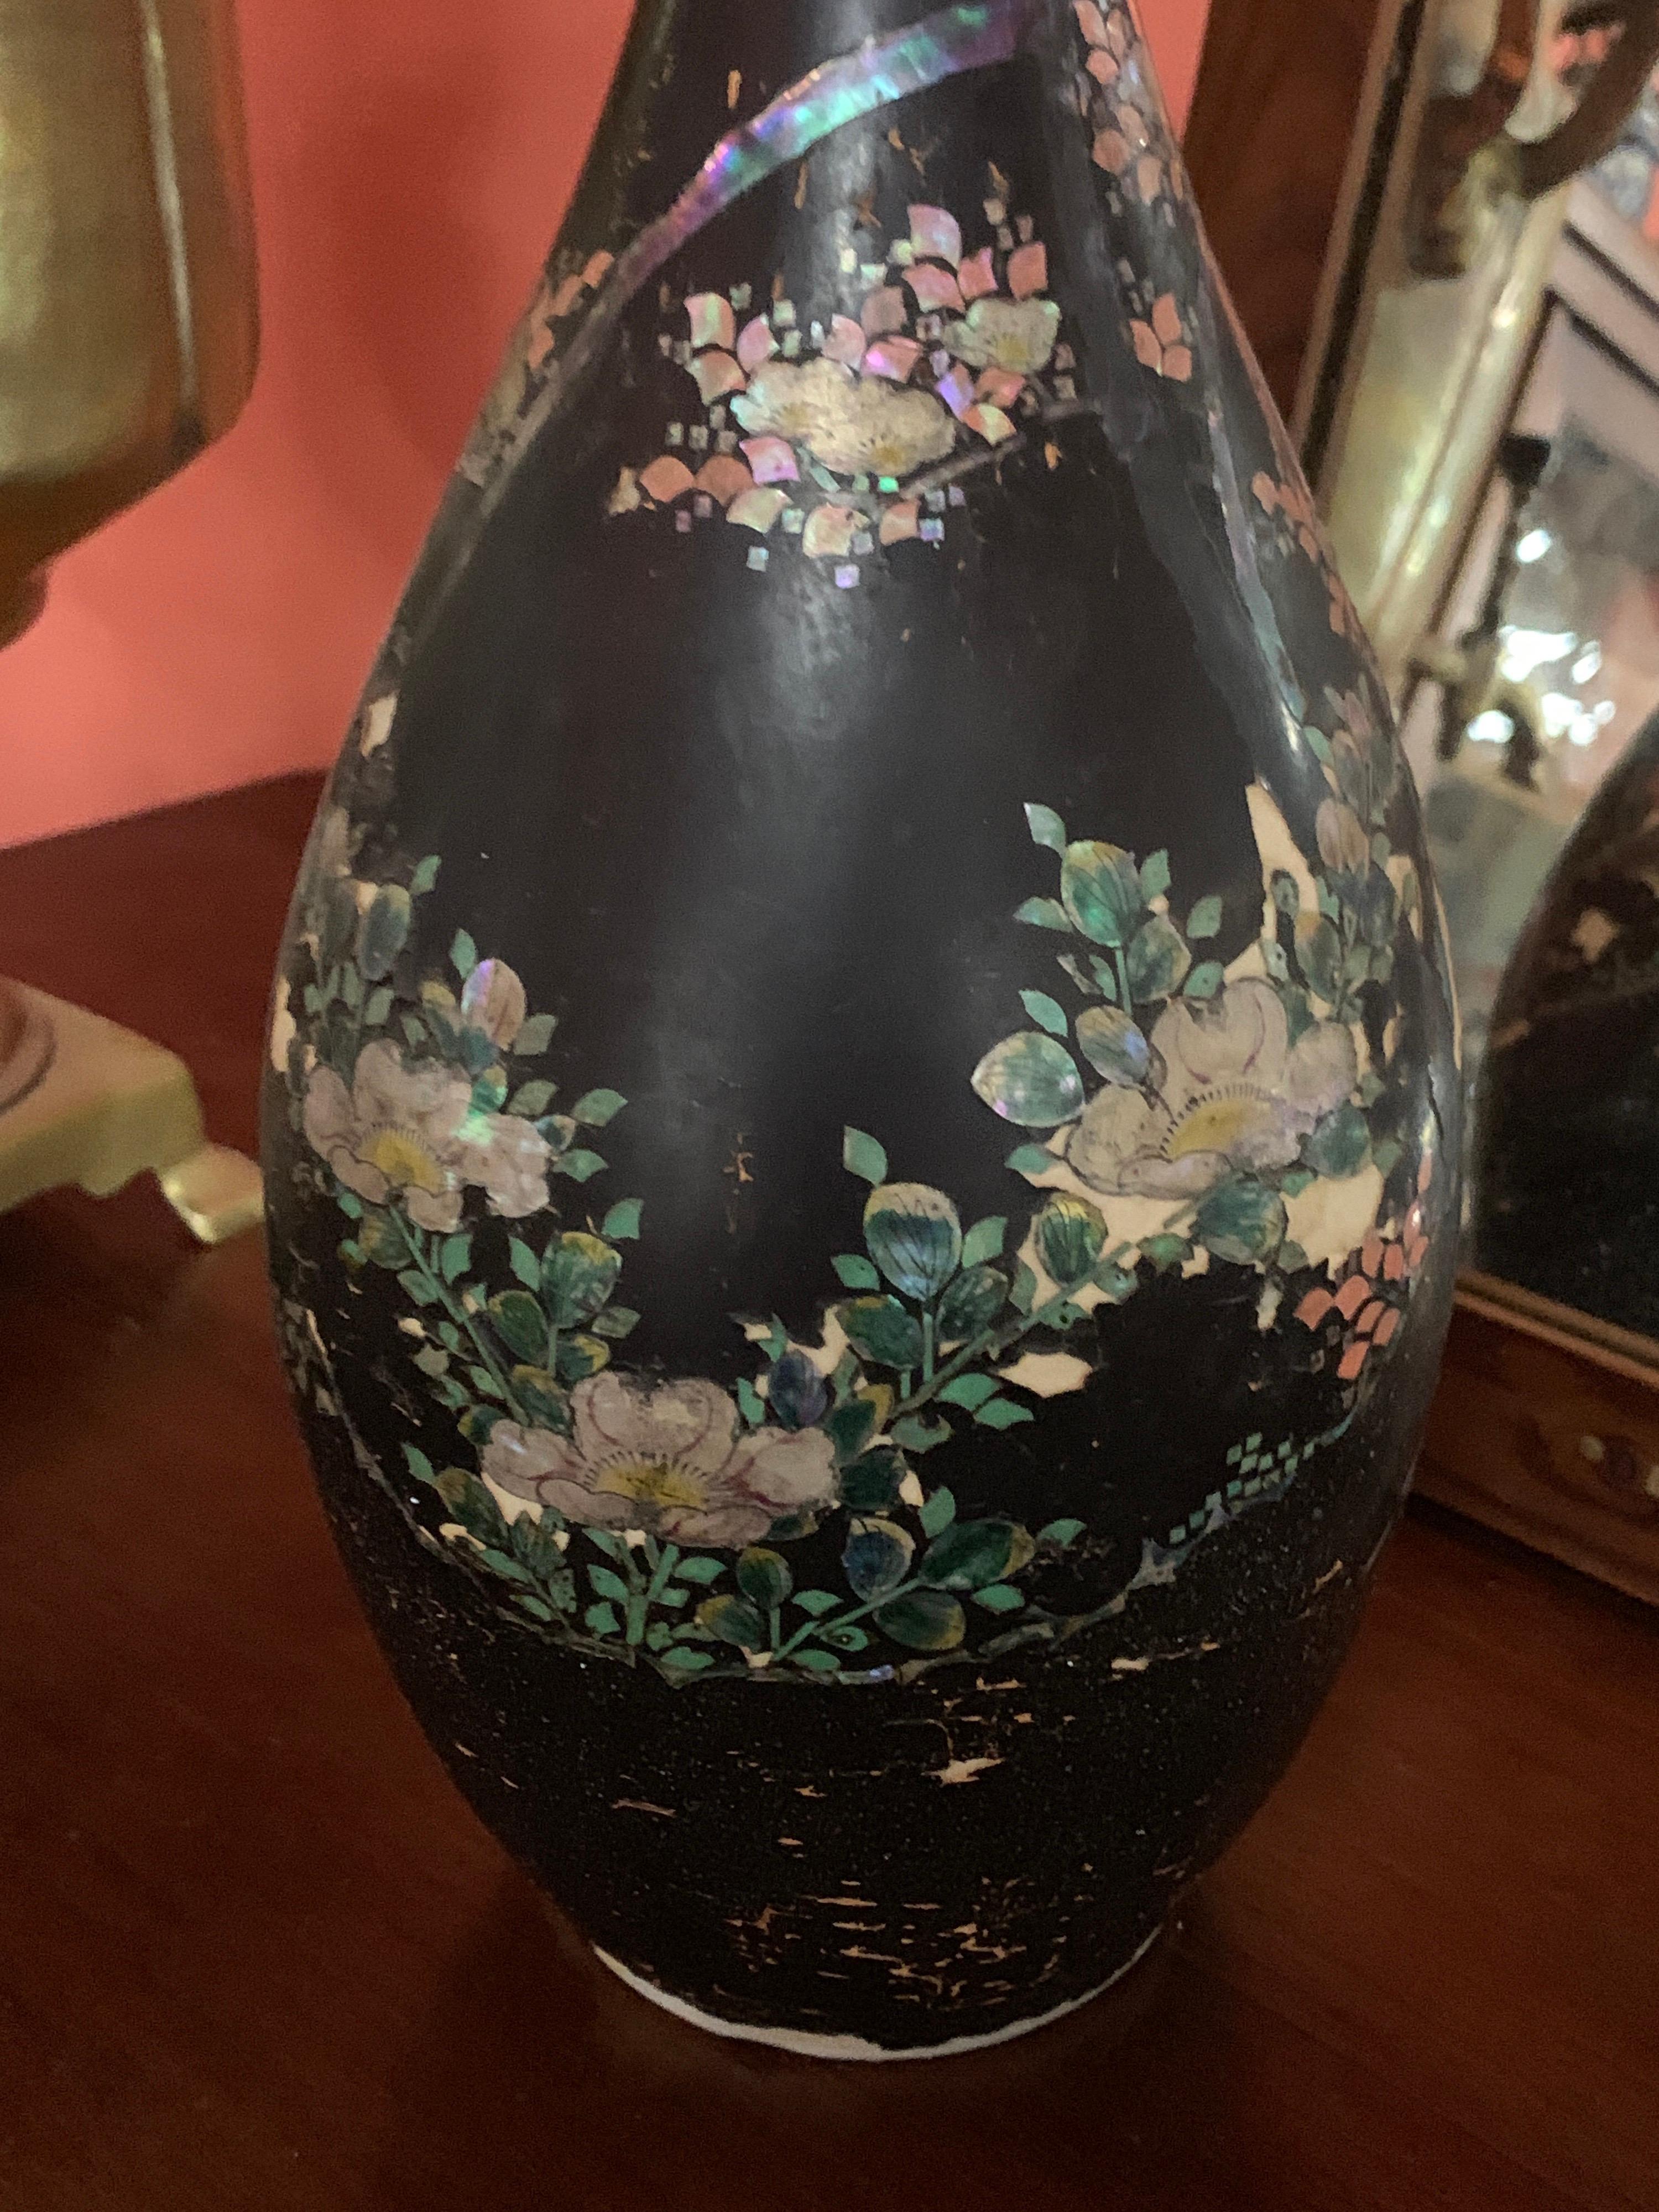 Anglo-Japanese Mother of Pearl Fine Inlaid Black Porcelain Japanese Vase, circa 1870